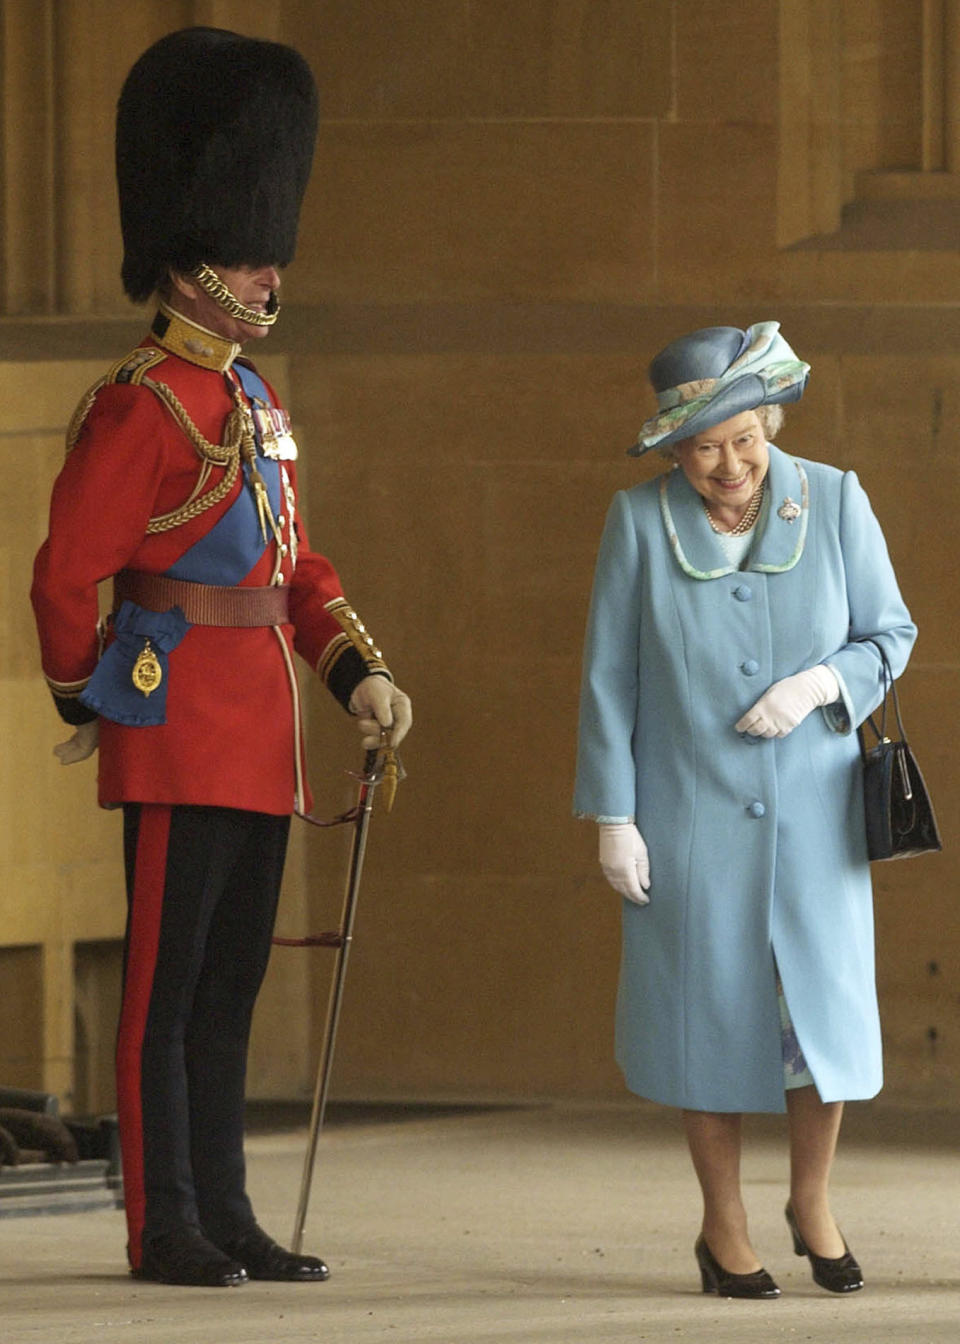 FILE - In this Tuesday April 15, 2003 file photo, Britain's Queen Elizabeth II and Prince Philip prior to The Queen's Company Grenadier Guards ceremonial review at Windsor Castle, Windsor, England. Buckingham Palace says Prince Philip, husband of Queen Elizabeth II, has died aged 99. (AP Photo/Chris Young, Pool, file)